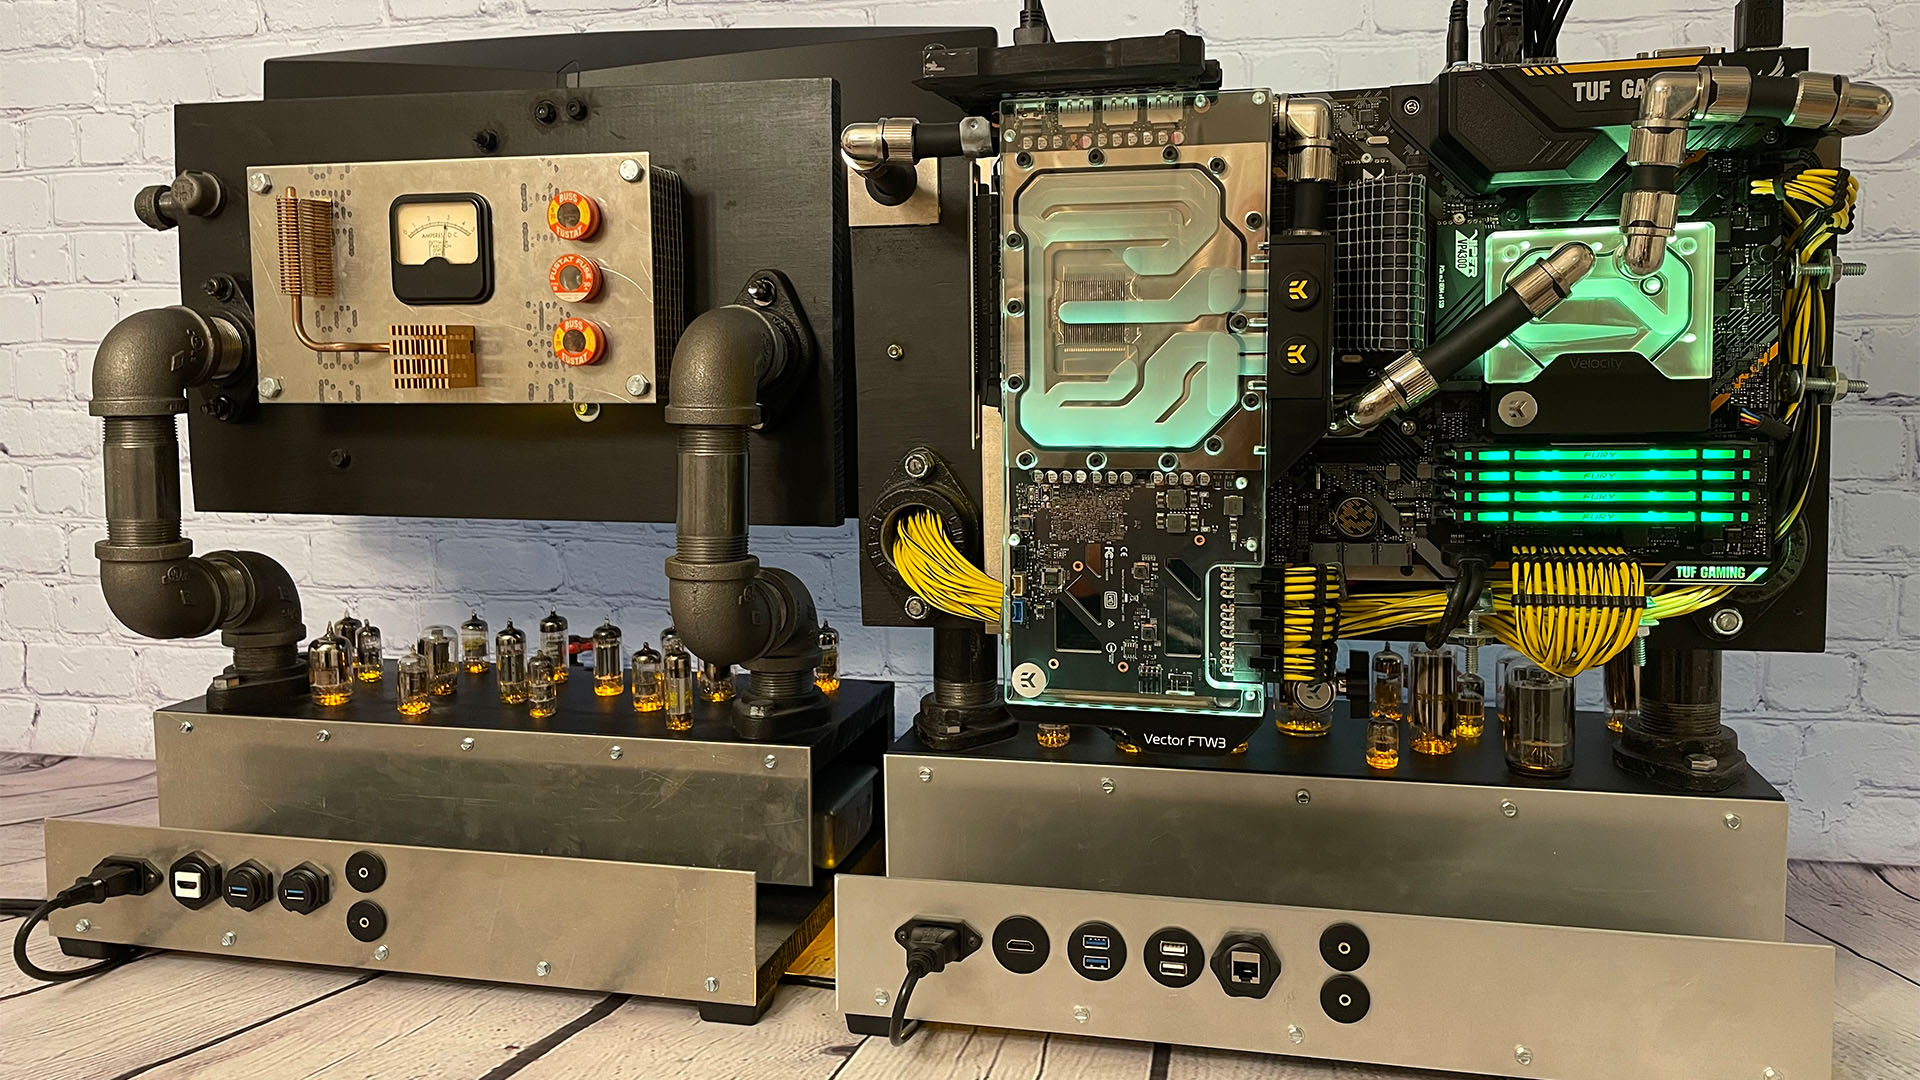 The inside of the steampunk gaming PC which sits on a desk